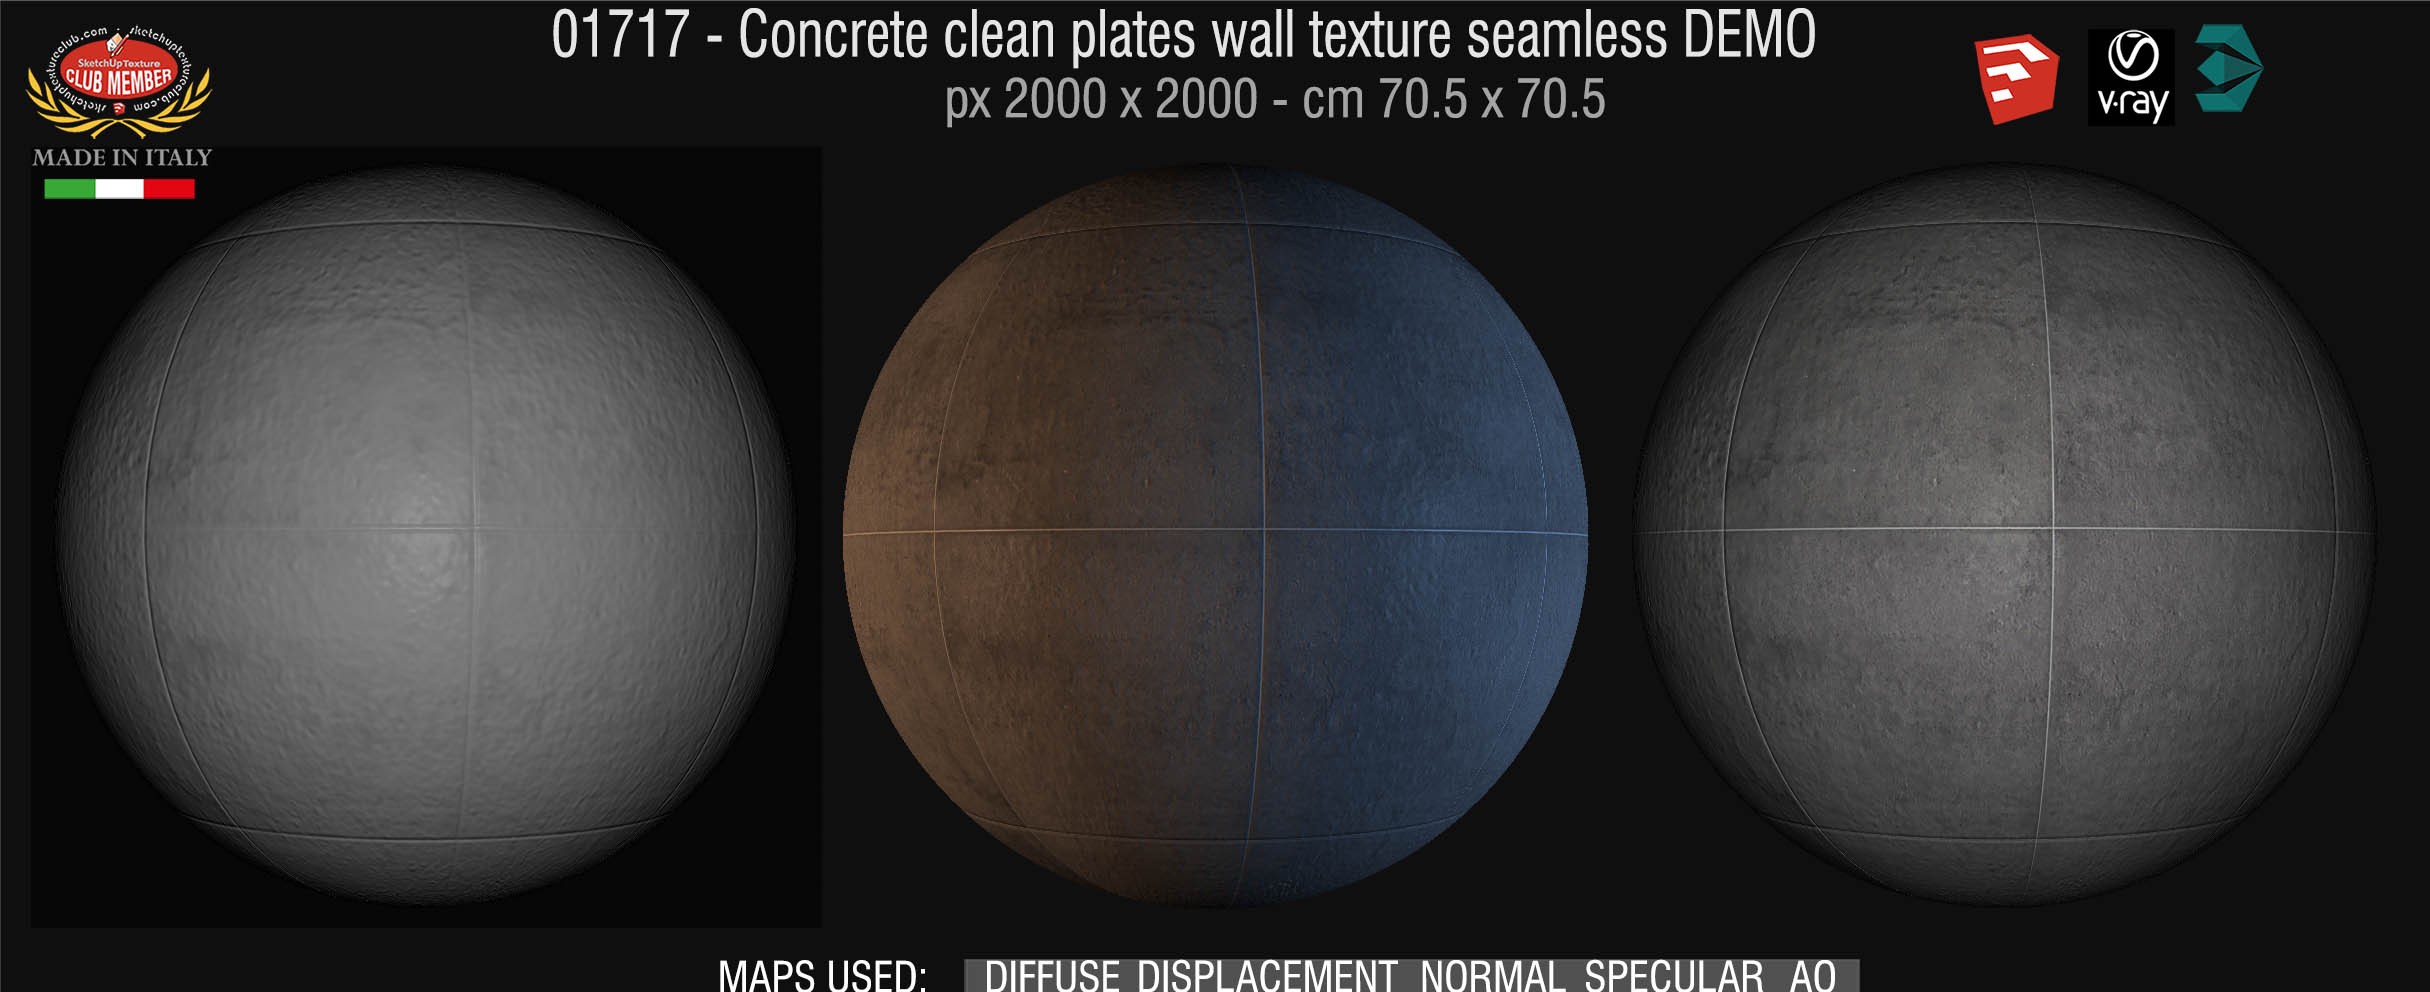 01717 Concrete clean plates wall texture seamless + maps DEMO